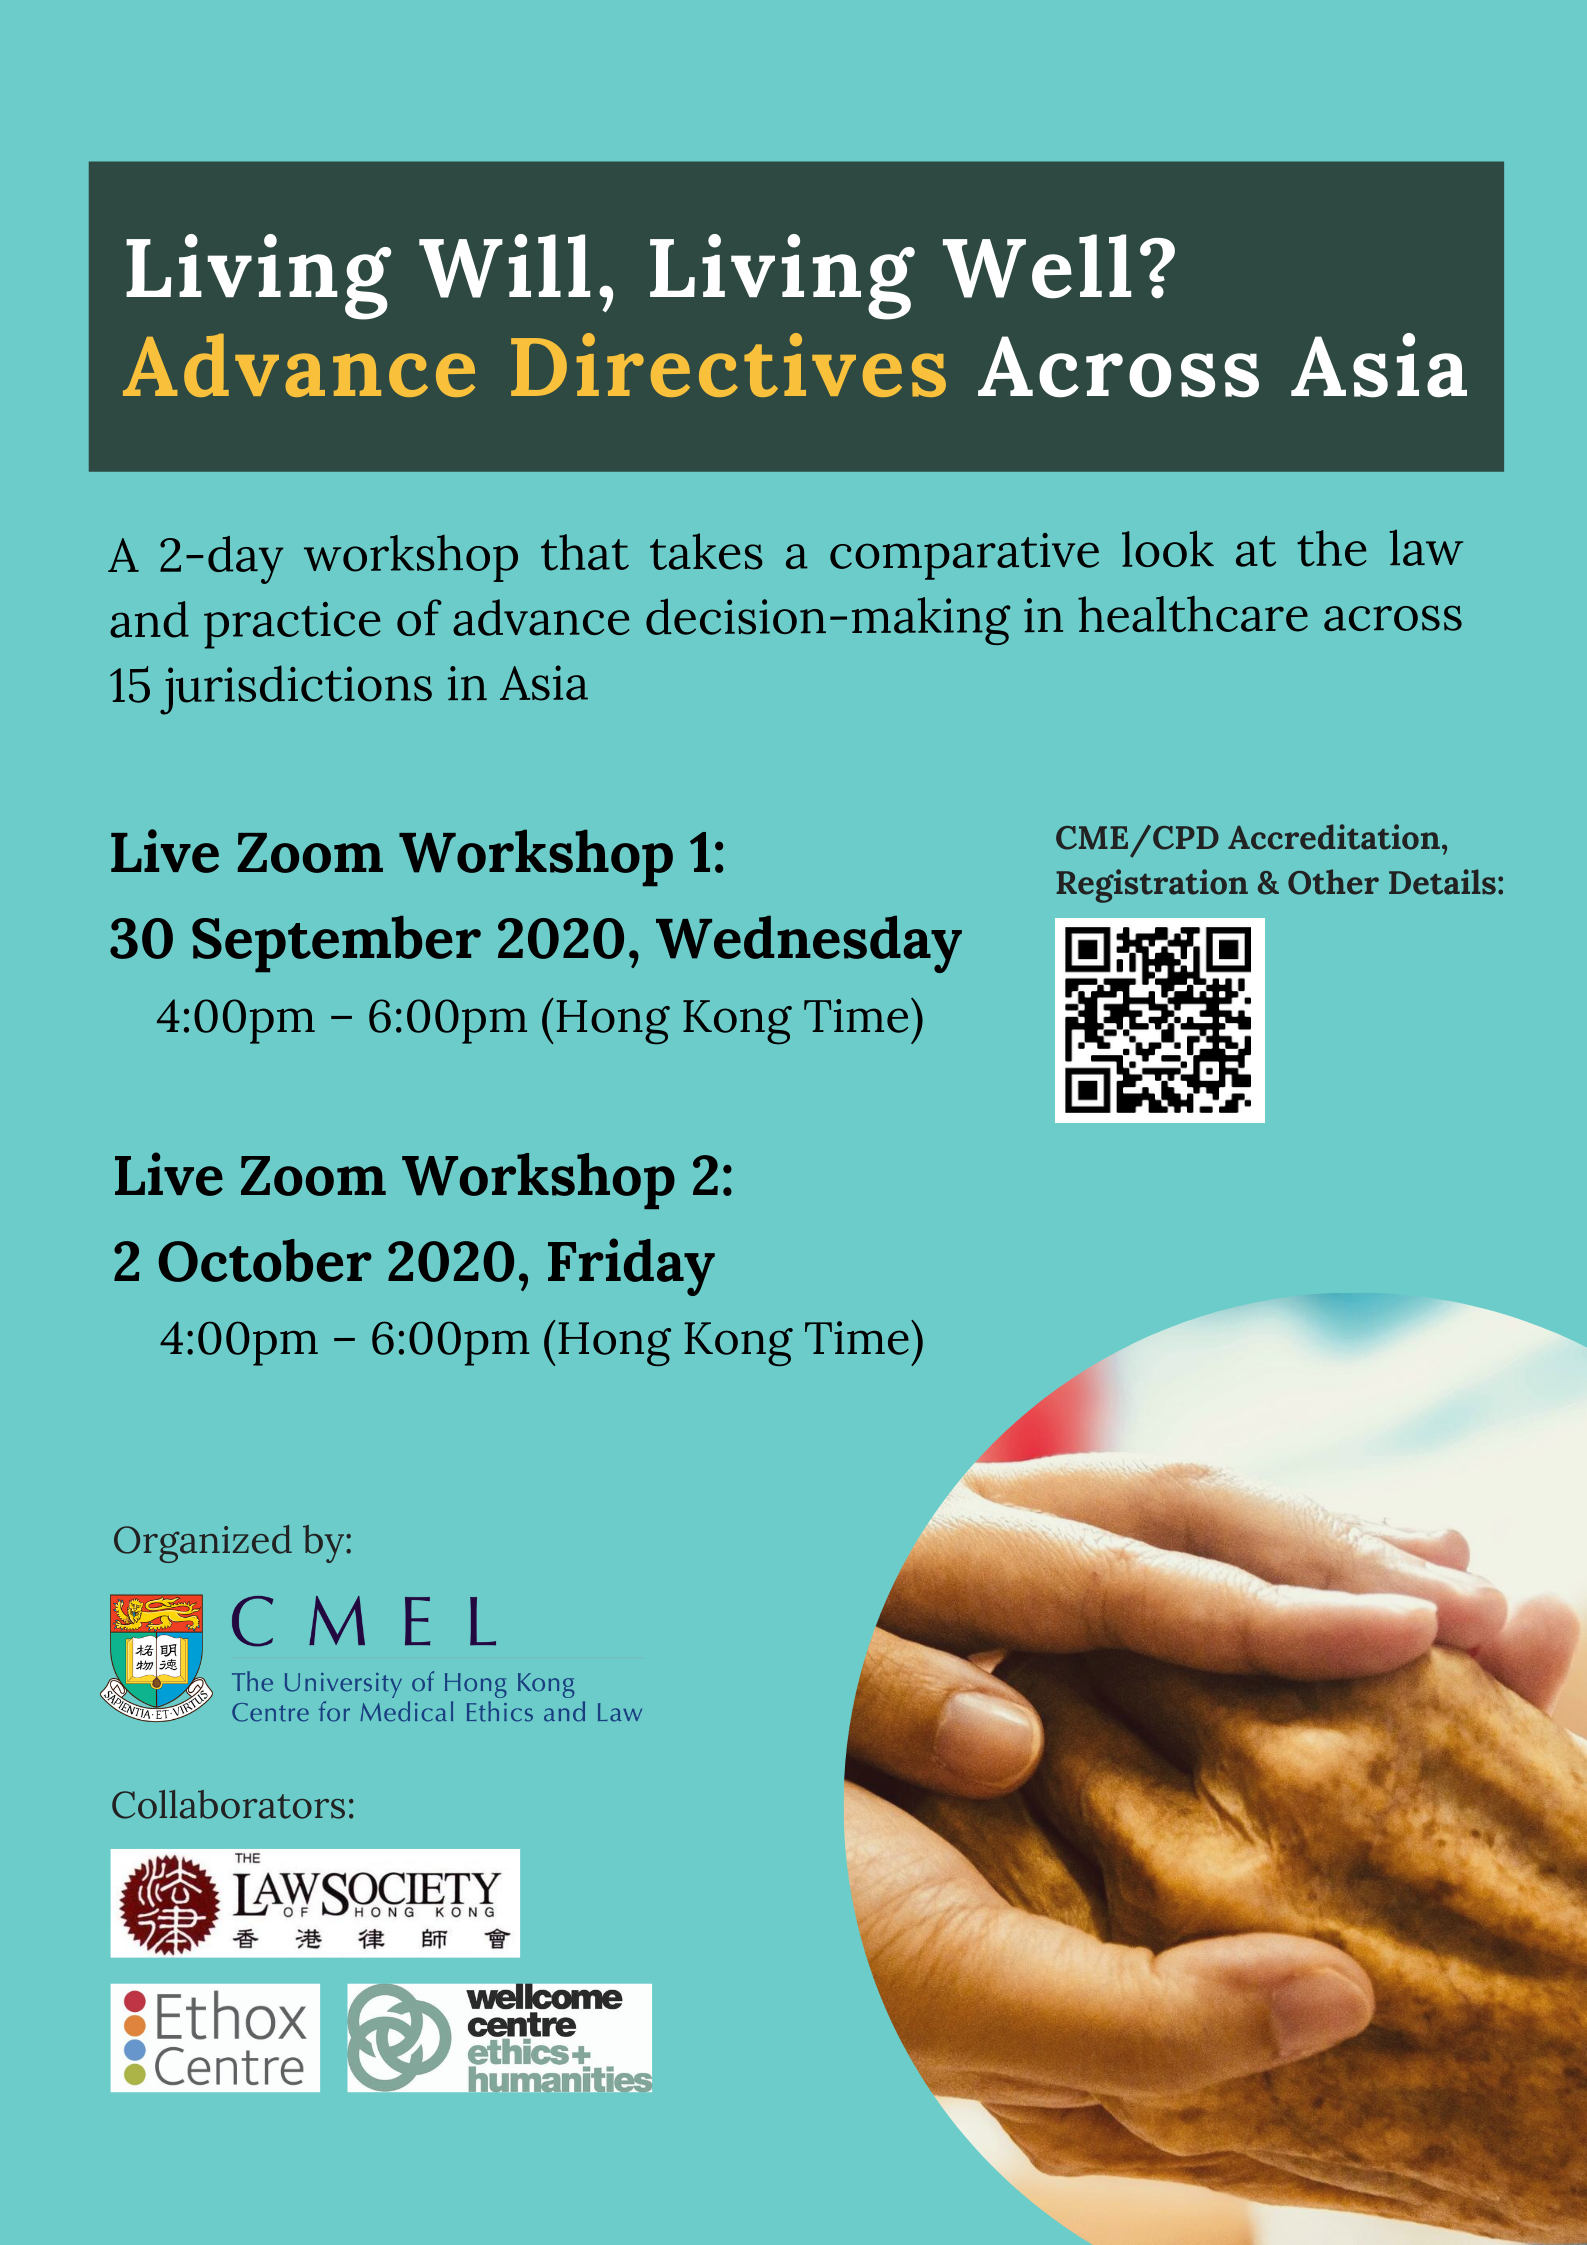 Living Will, Living Well? Advance Directives Across Asia Workshop 1